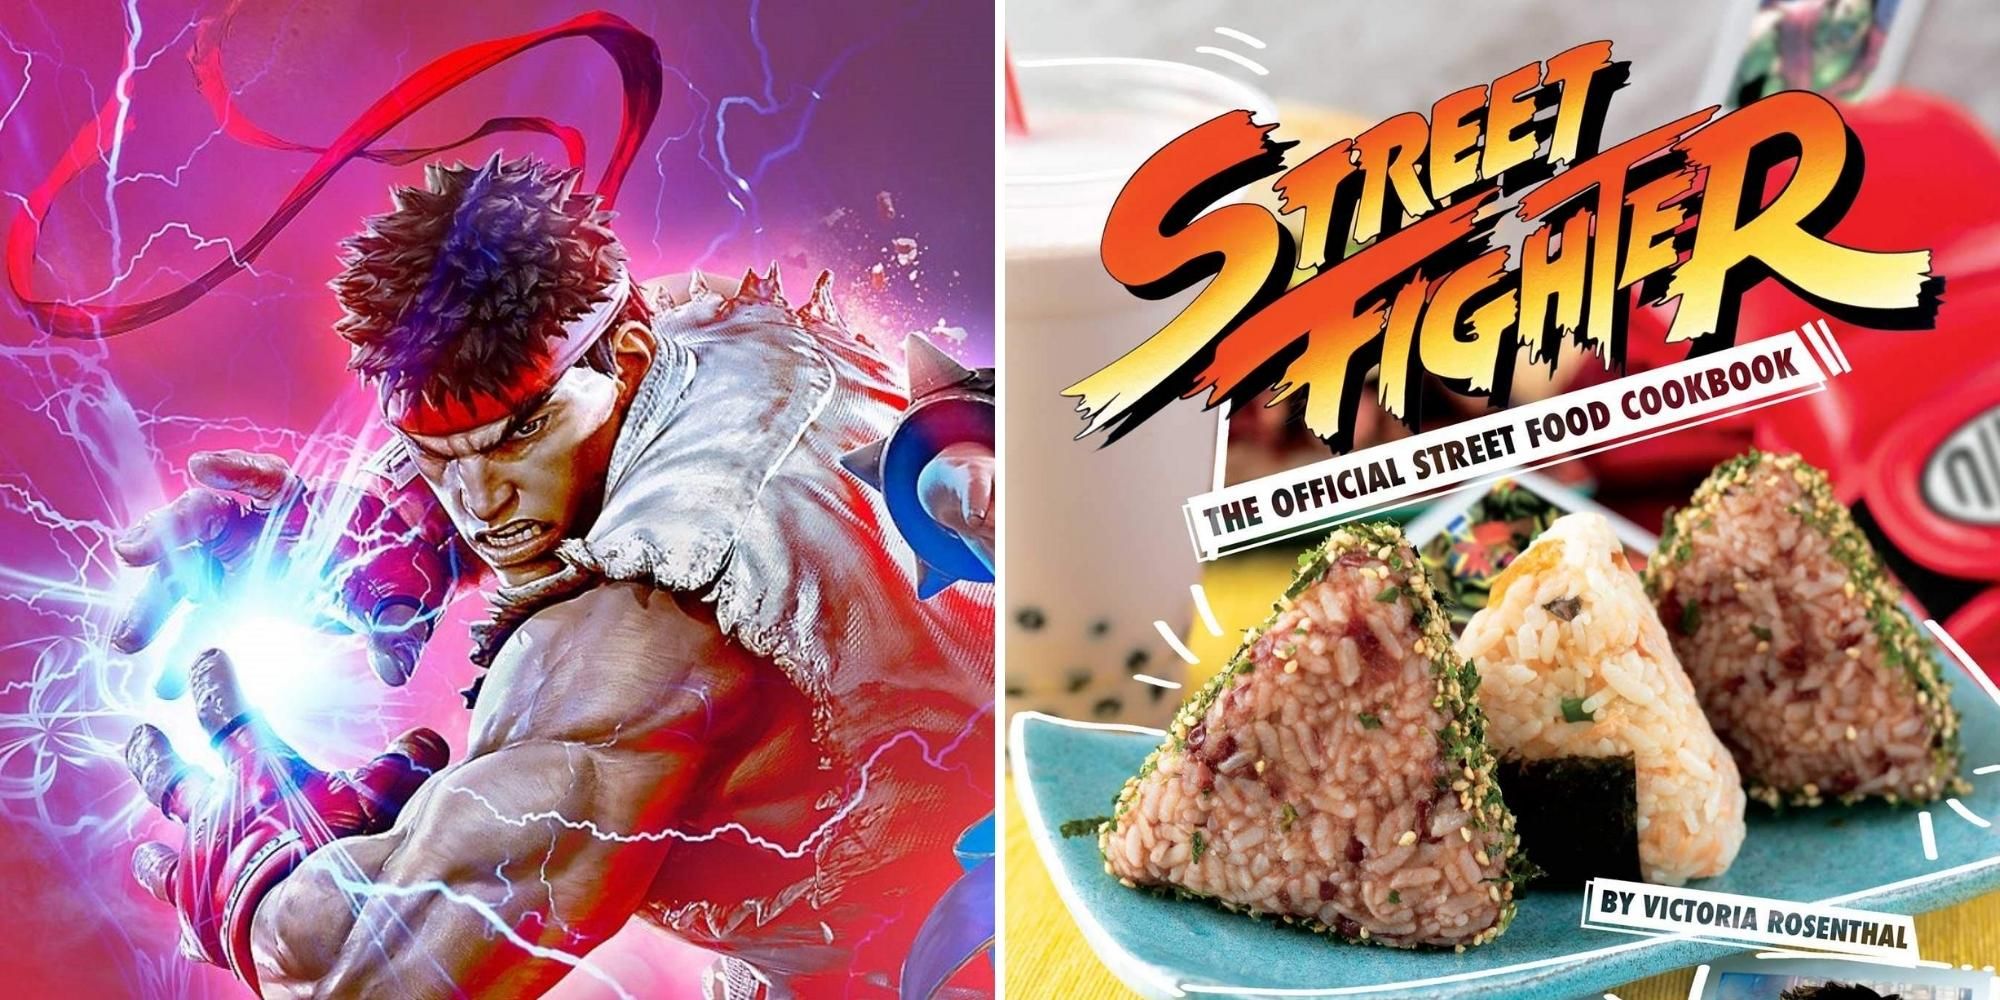 Ryu from Street Fighter and The Official Street Food Cookbook 